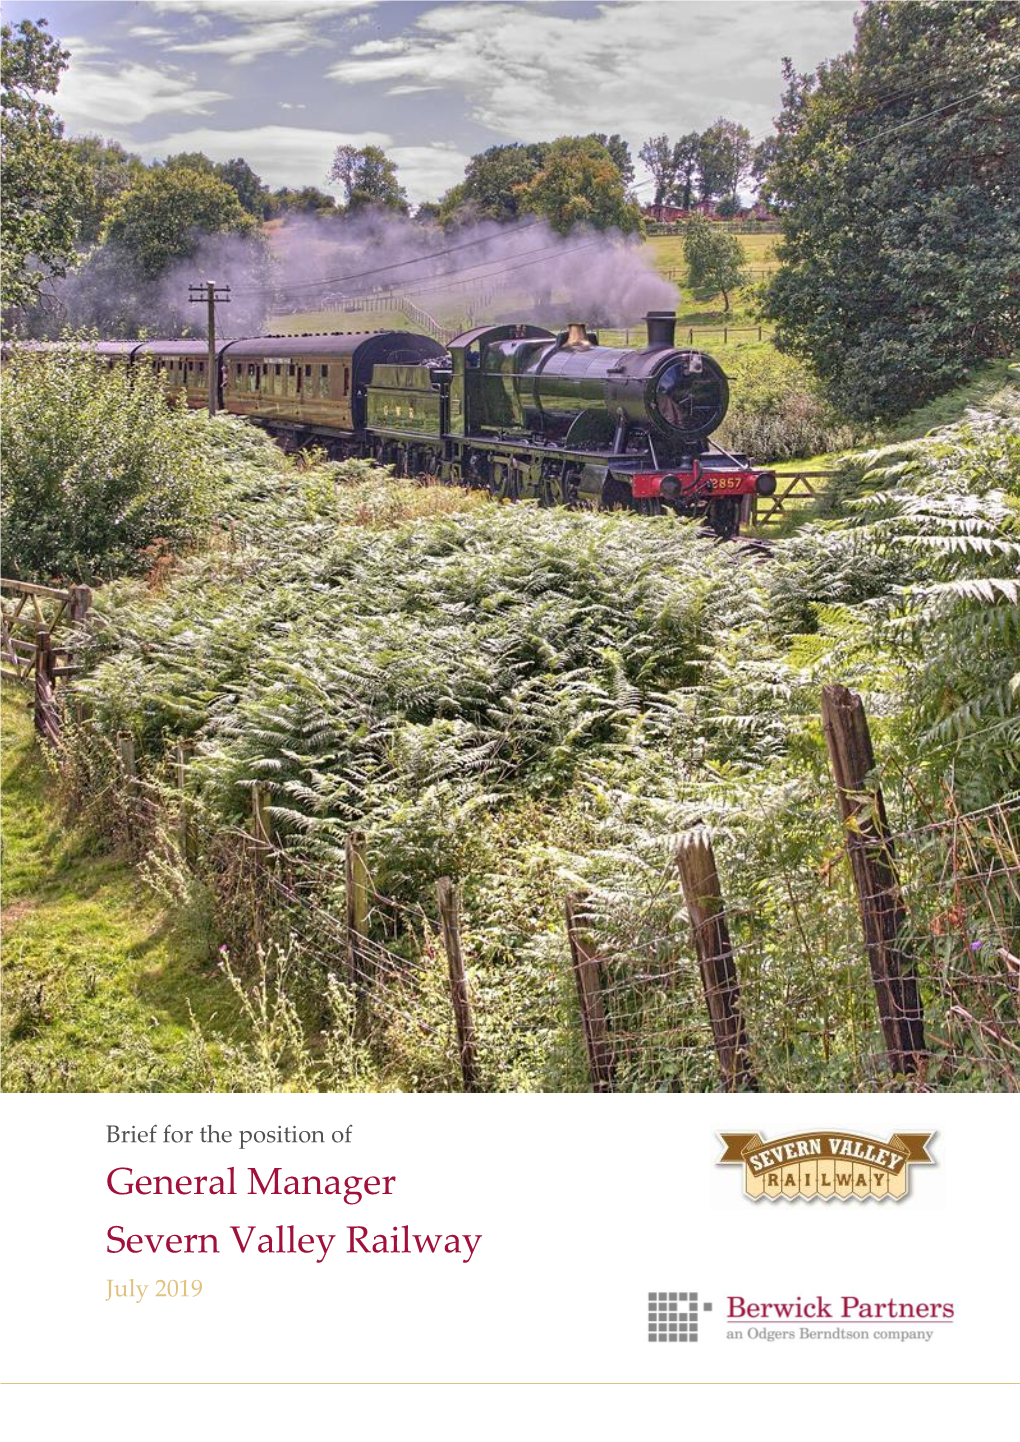 General Manager Severn Valley Railway